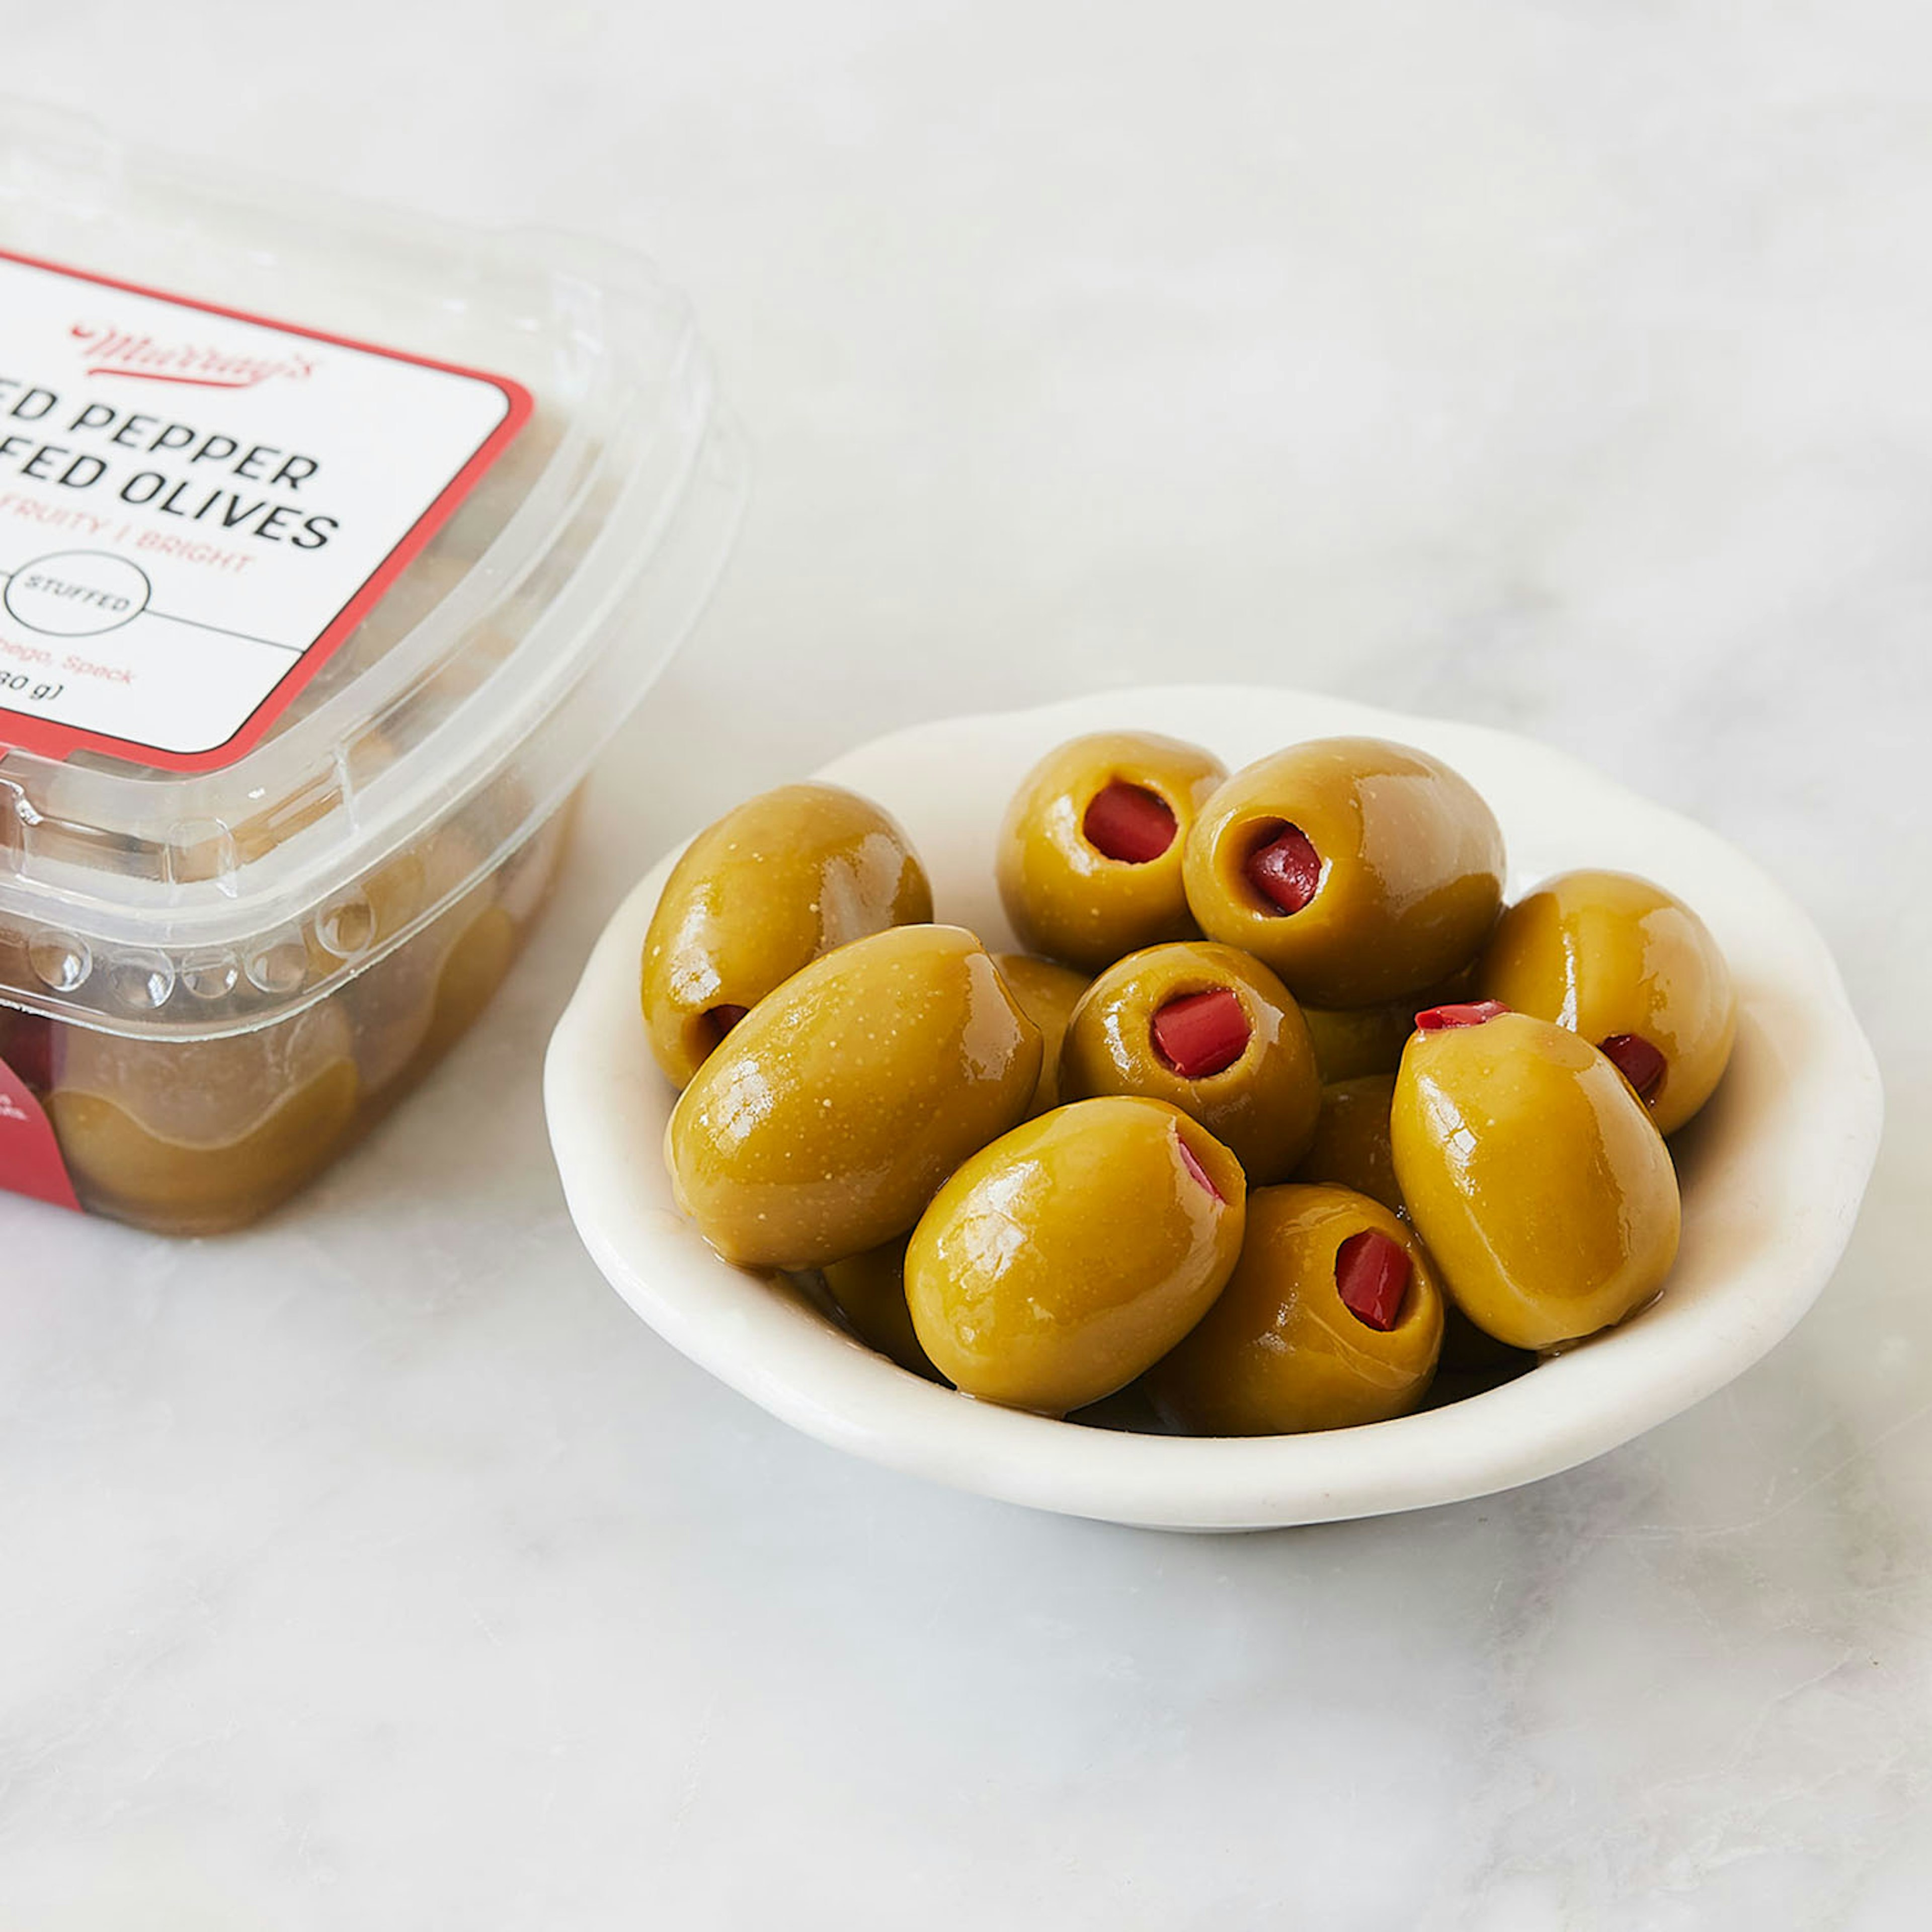 Murrays-Red-Pepper-Stuffed-Olives-specialty-foods-127344-01